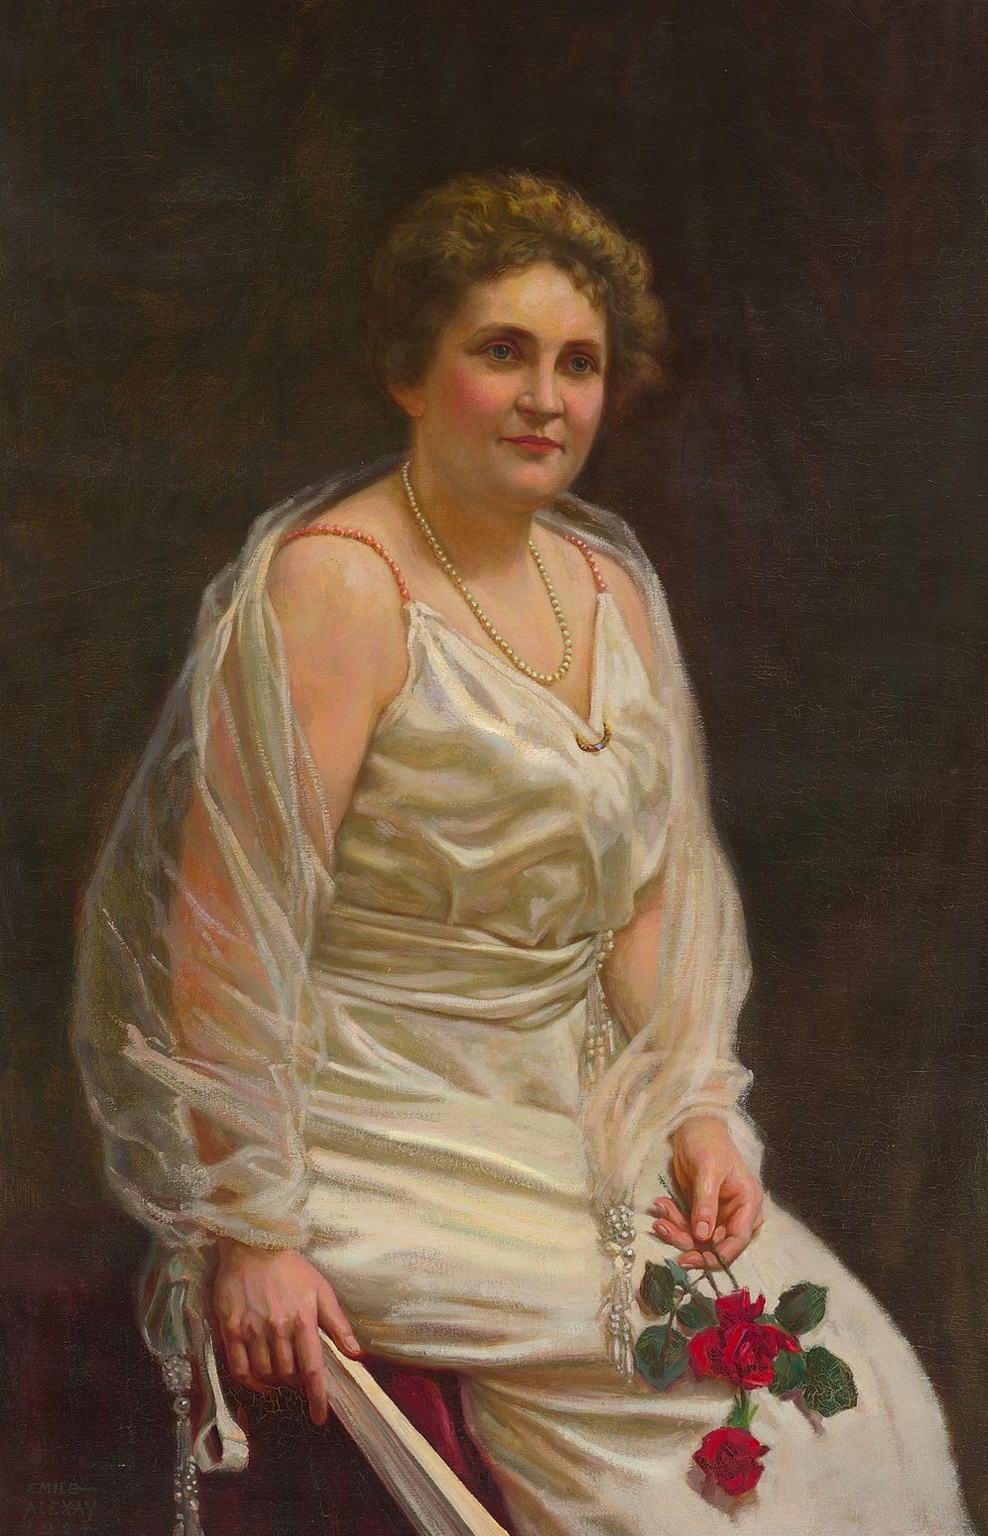 A 1924 portrait of Edith